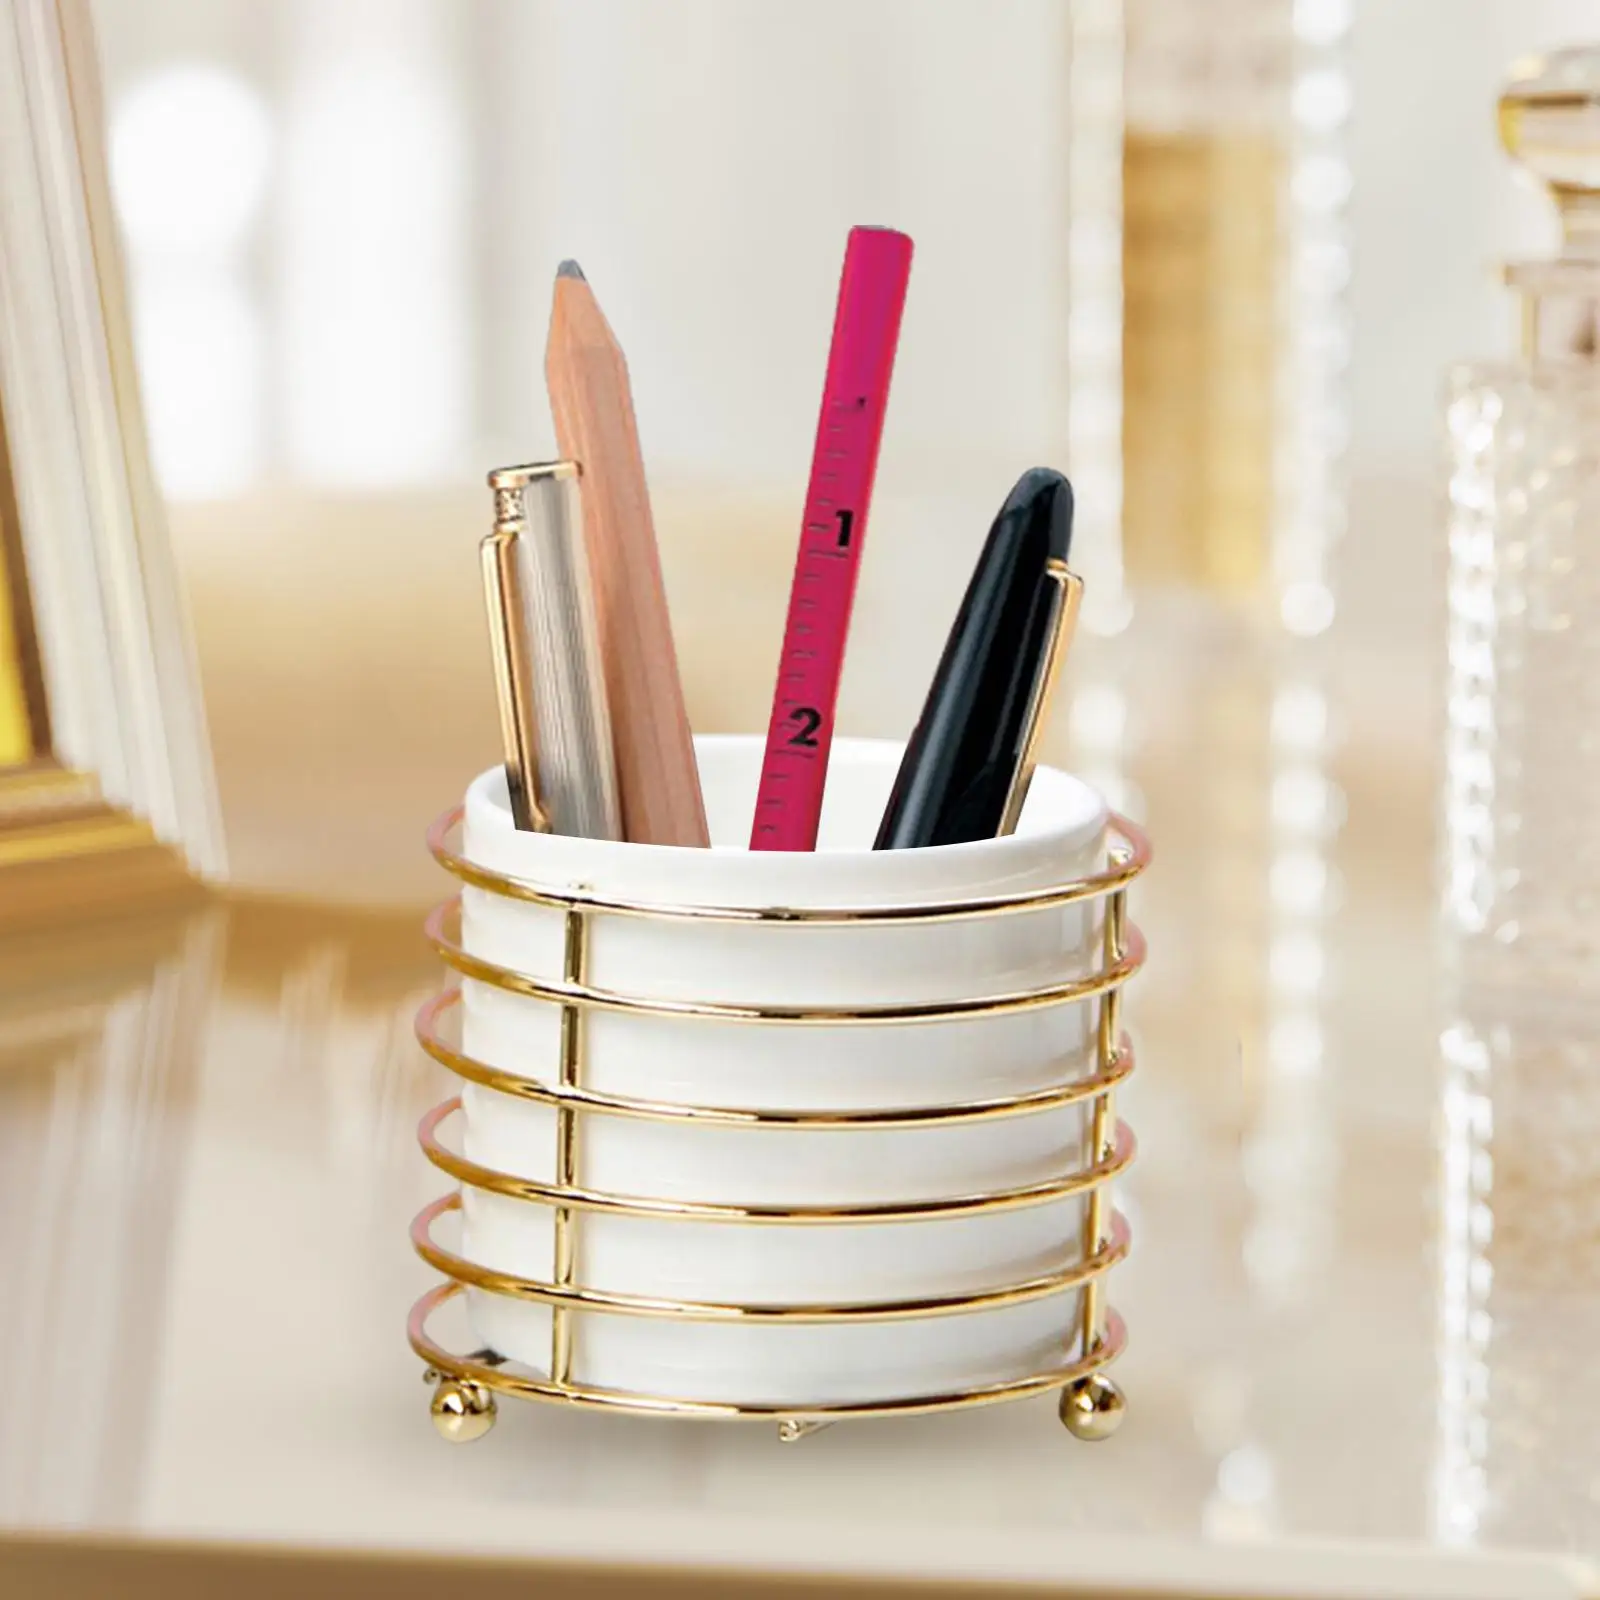 Modern Jewelry Makeup Brush Holder Container Candle Cup Desktop Storage Cup for Lipstick Pencil Pen Eyeliners Bedroom Study Room